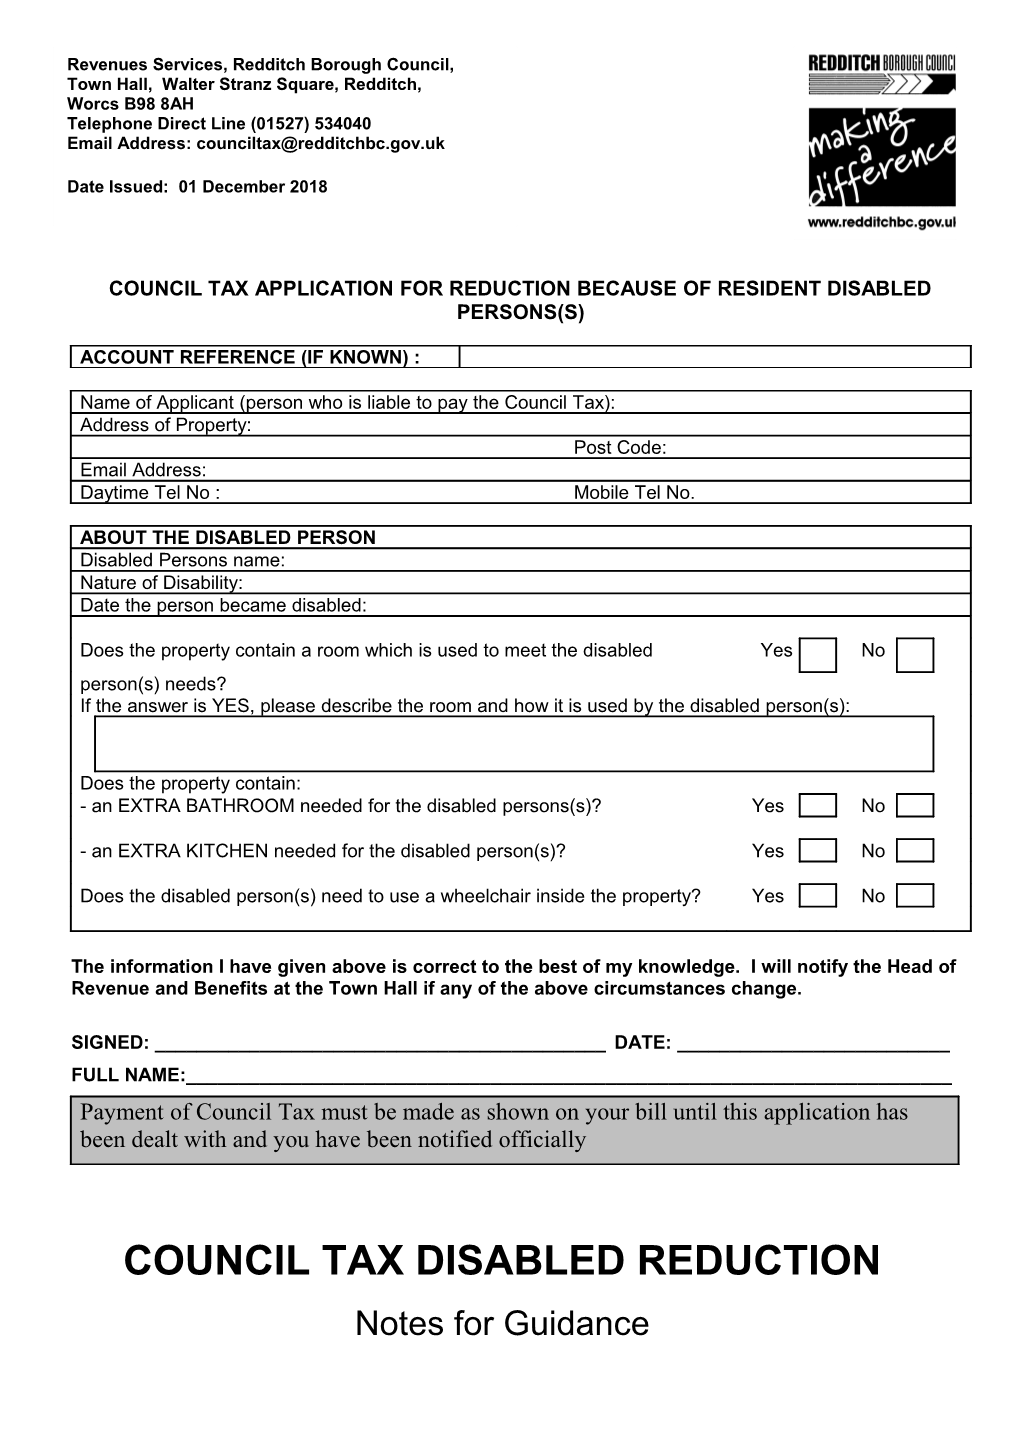 Council Tax Application for Reduction Because of Resident Disabled Persons(S)